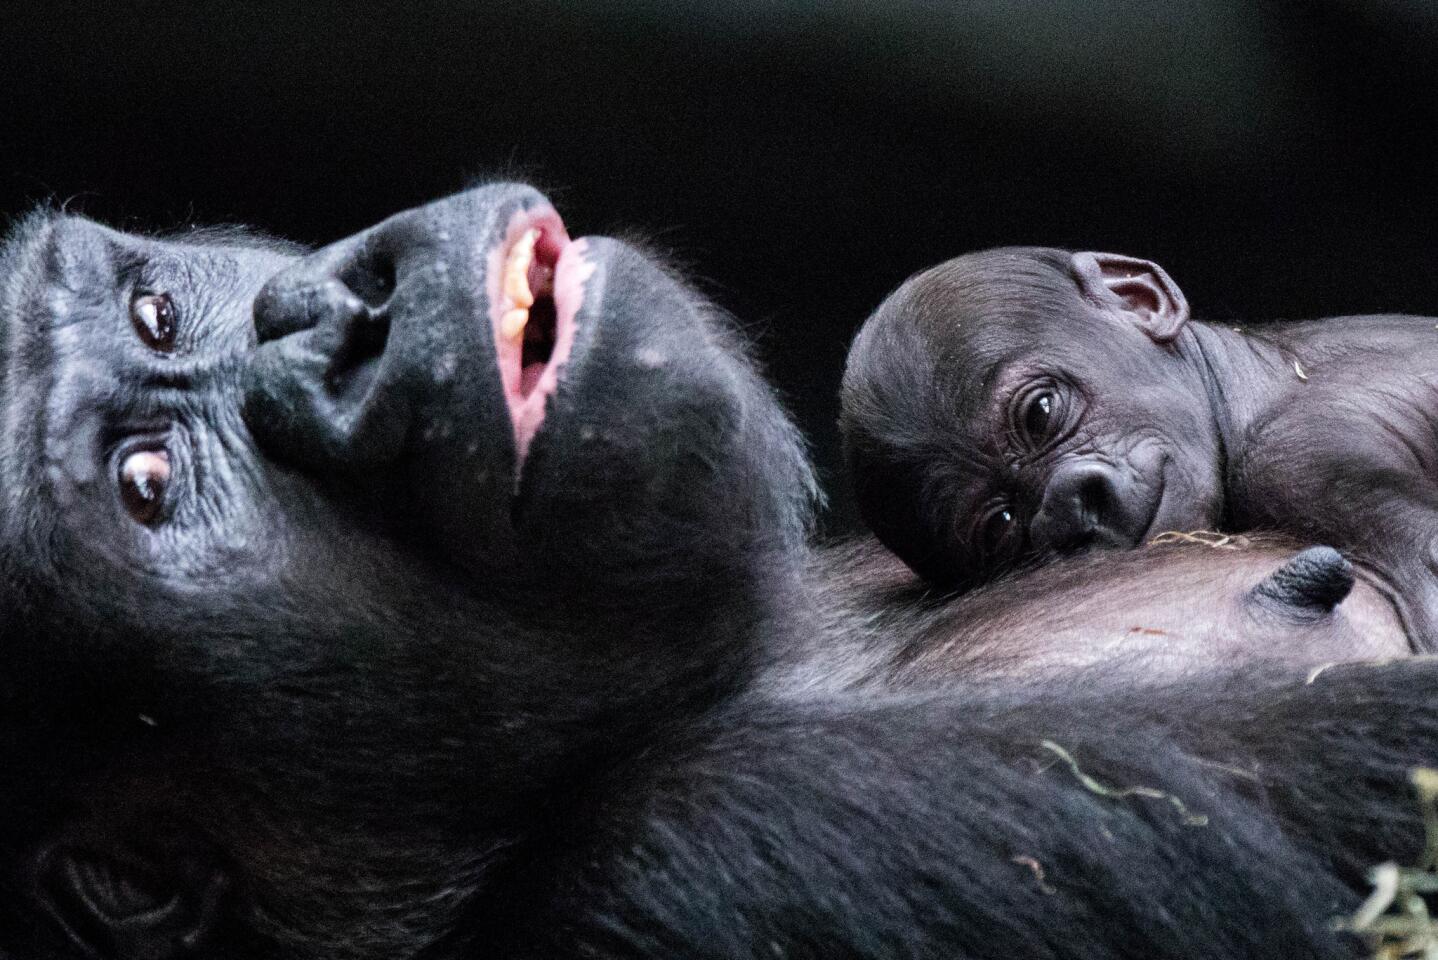 Ali, a 1-month-old western lowland gorilla, rests on the chest of her mother, Koola, at the Brookfield Zoo, on July 2, 2018, in Brookfield. Read her story here.